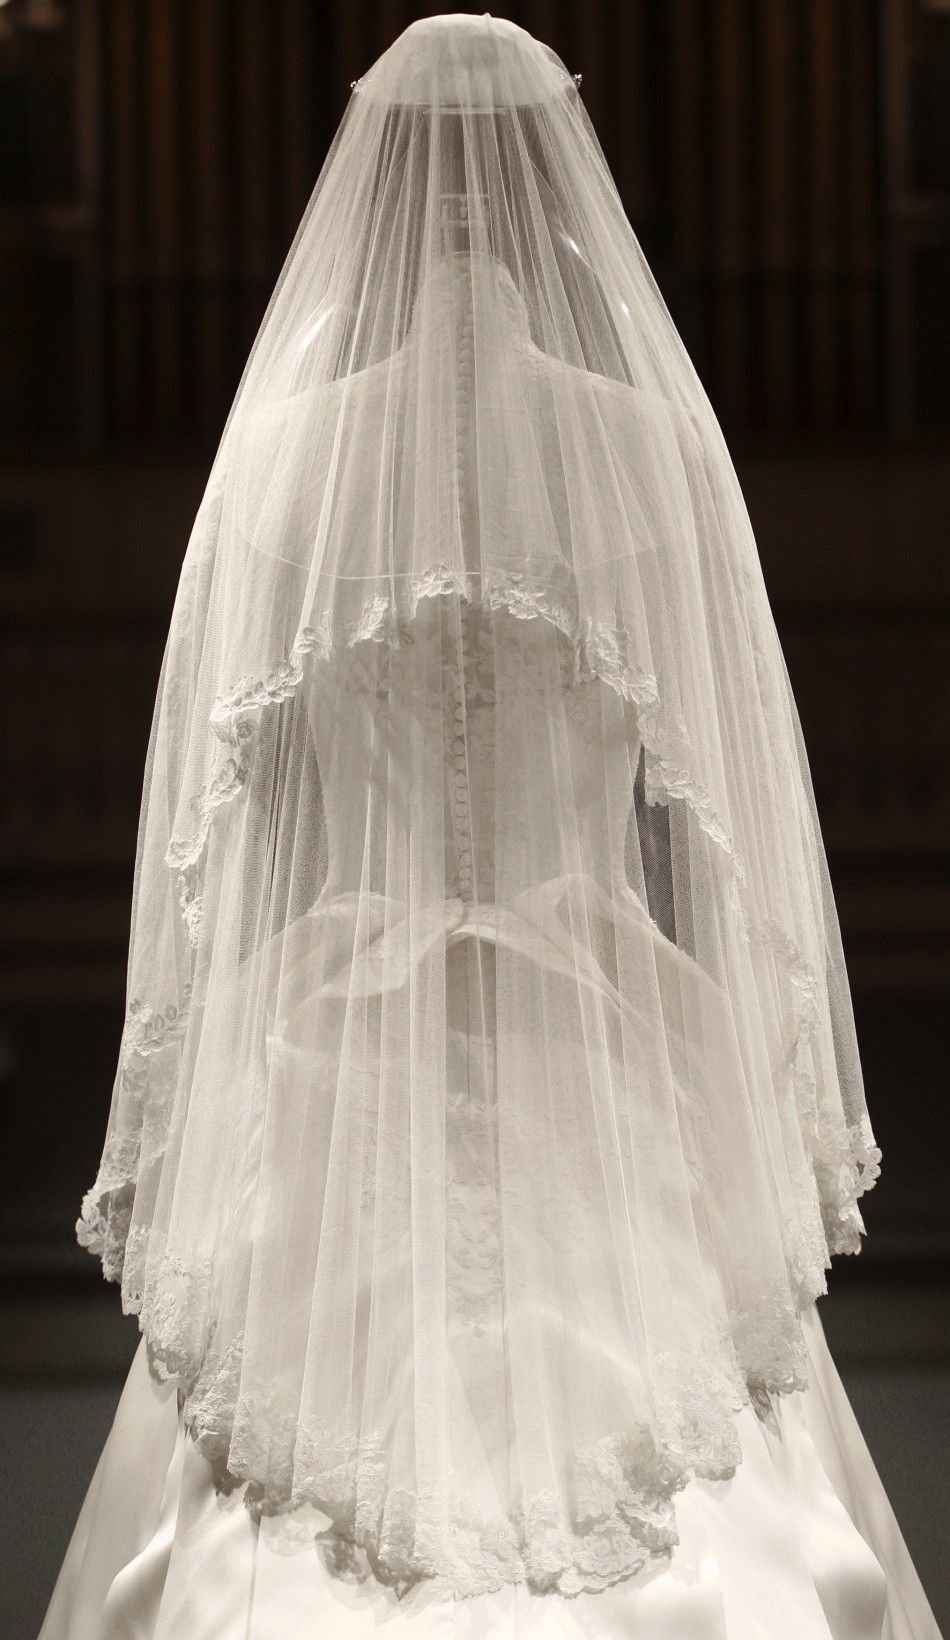 The wedding dress of Britains Catherine, Duchess of Cambridge is seen as it is prepared for display at Buckingham Palace in London